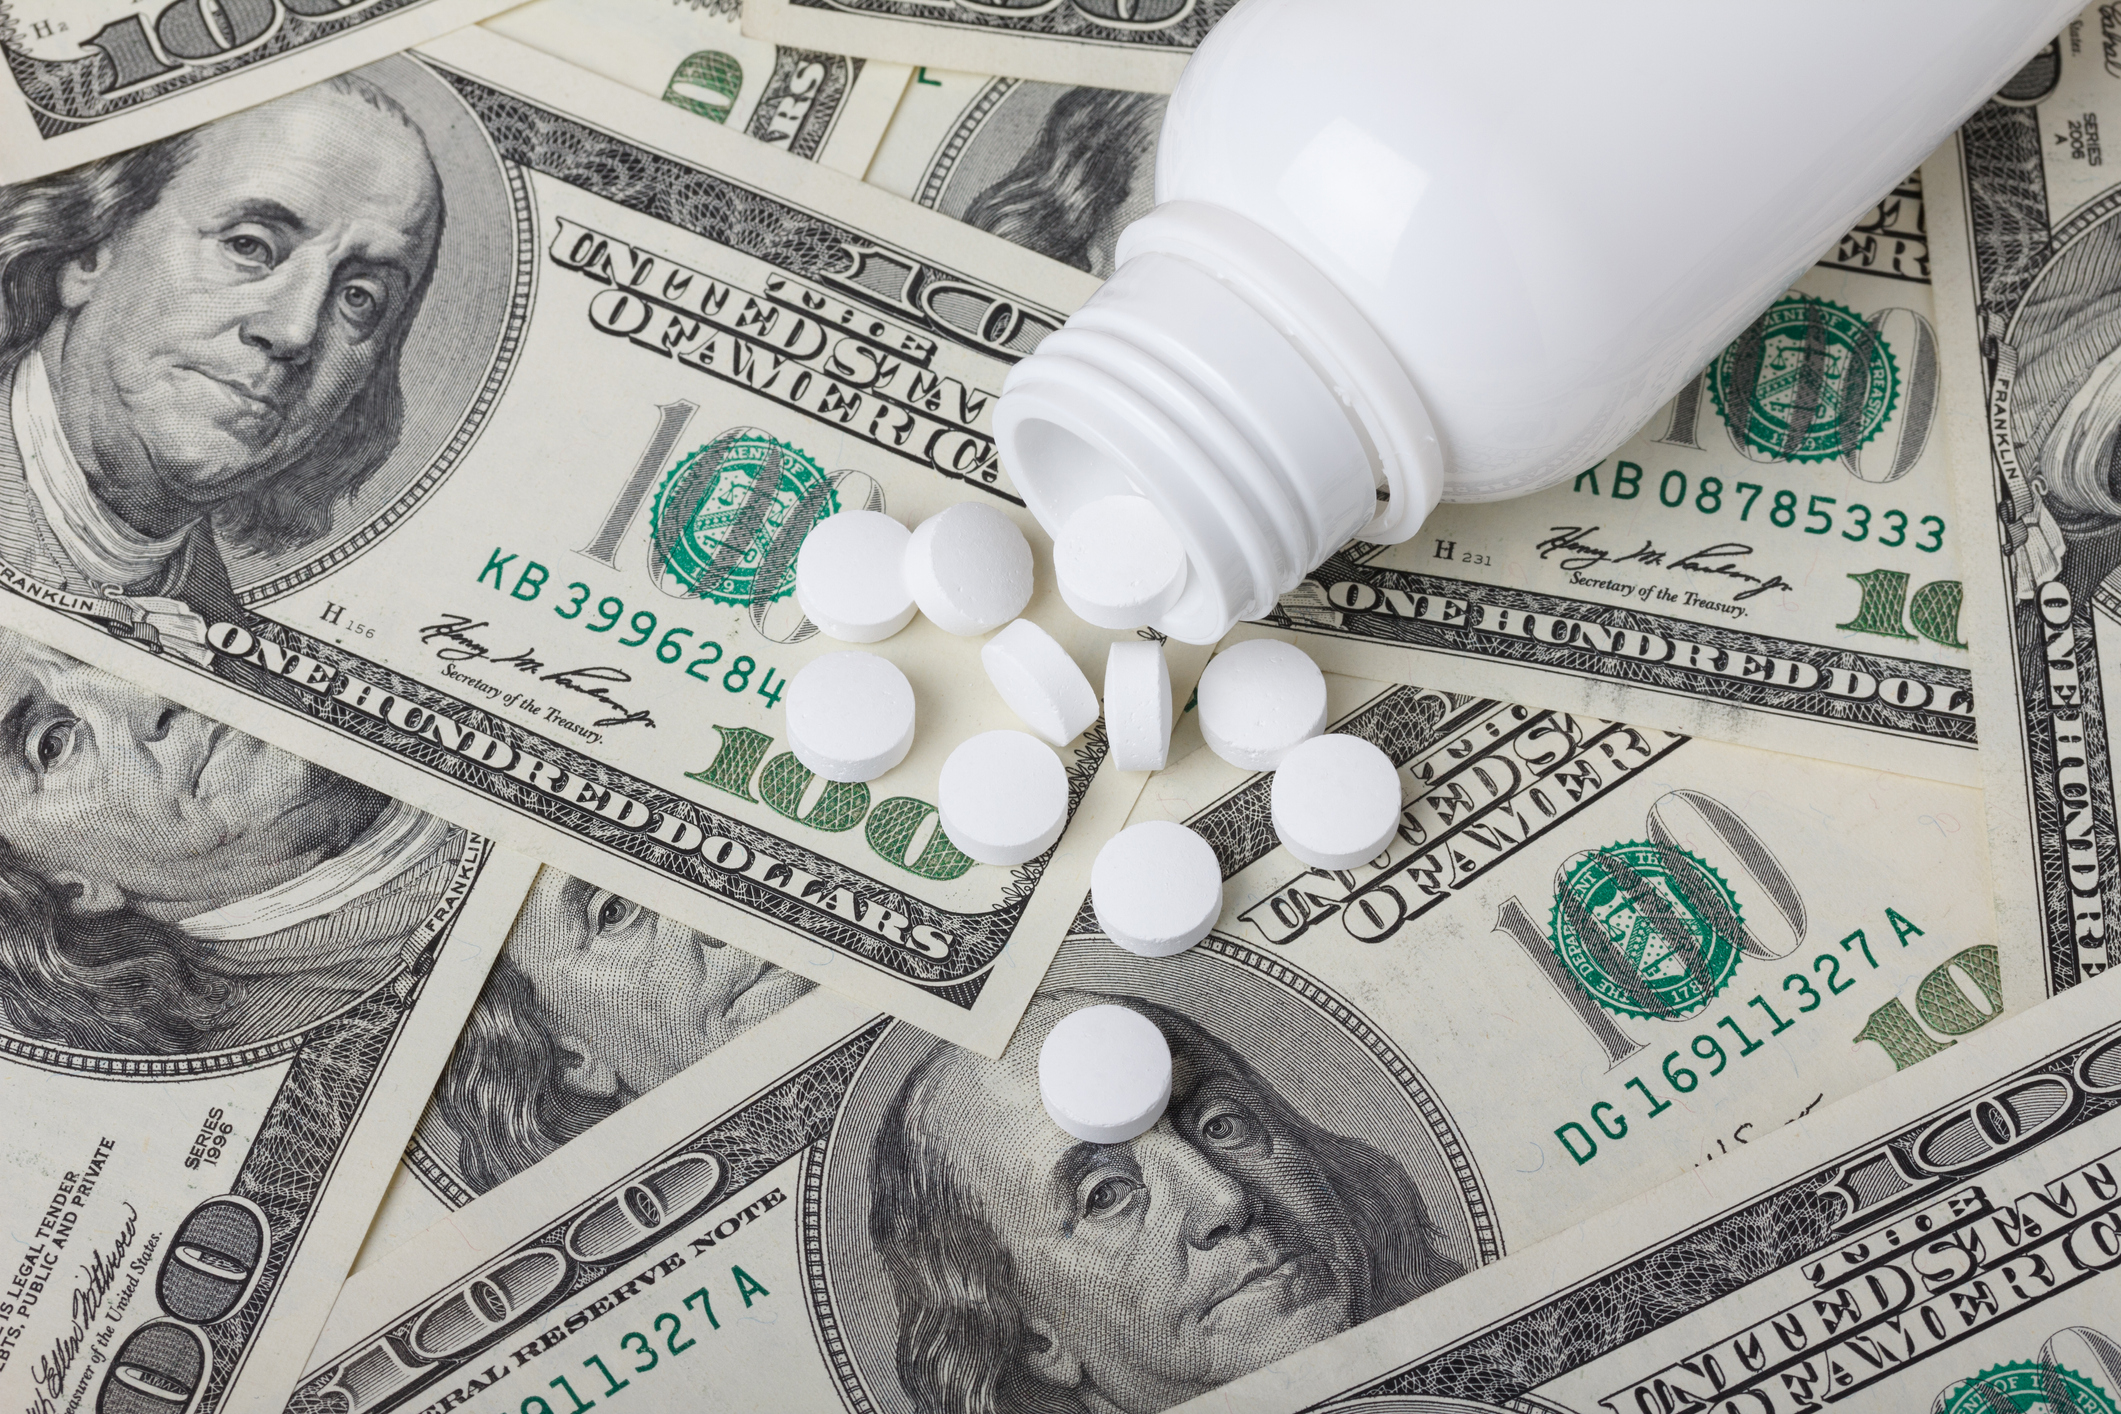 New Report from MGA Examines Impact of Rebates on Drug Pricing, Competition